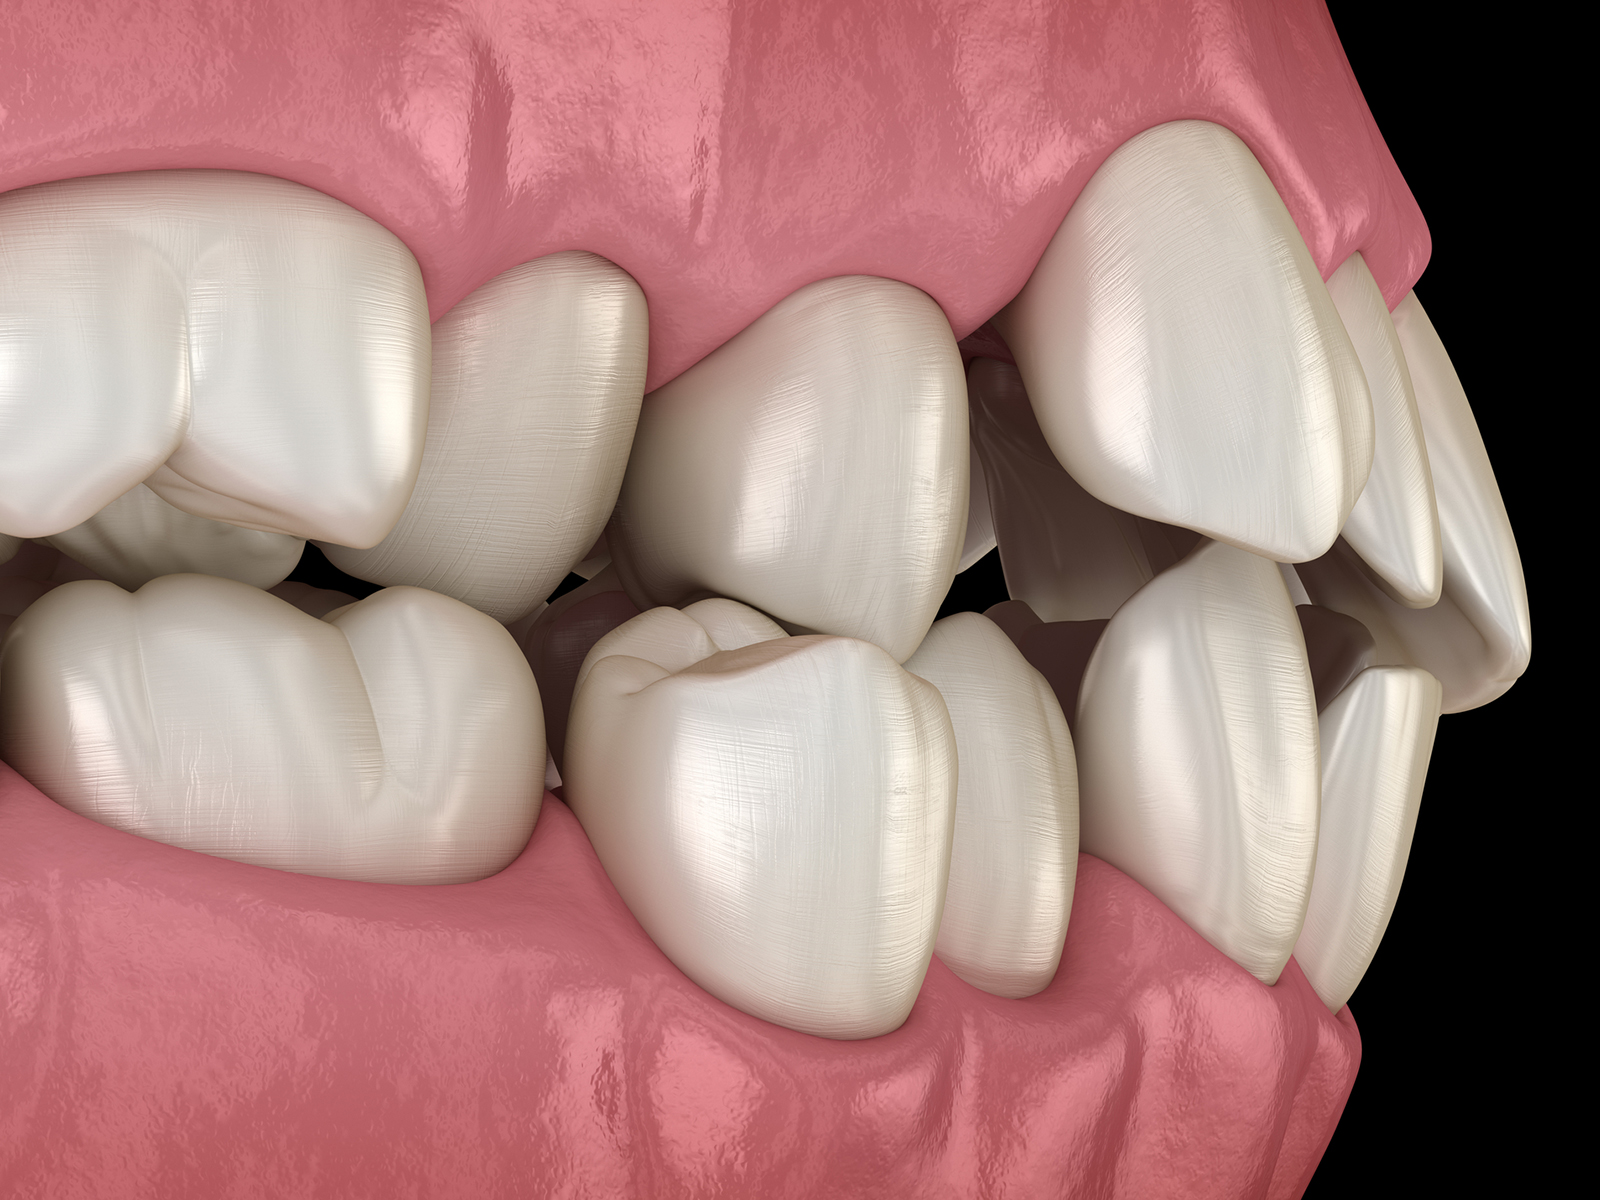 How to fix misaligned teeth?